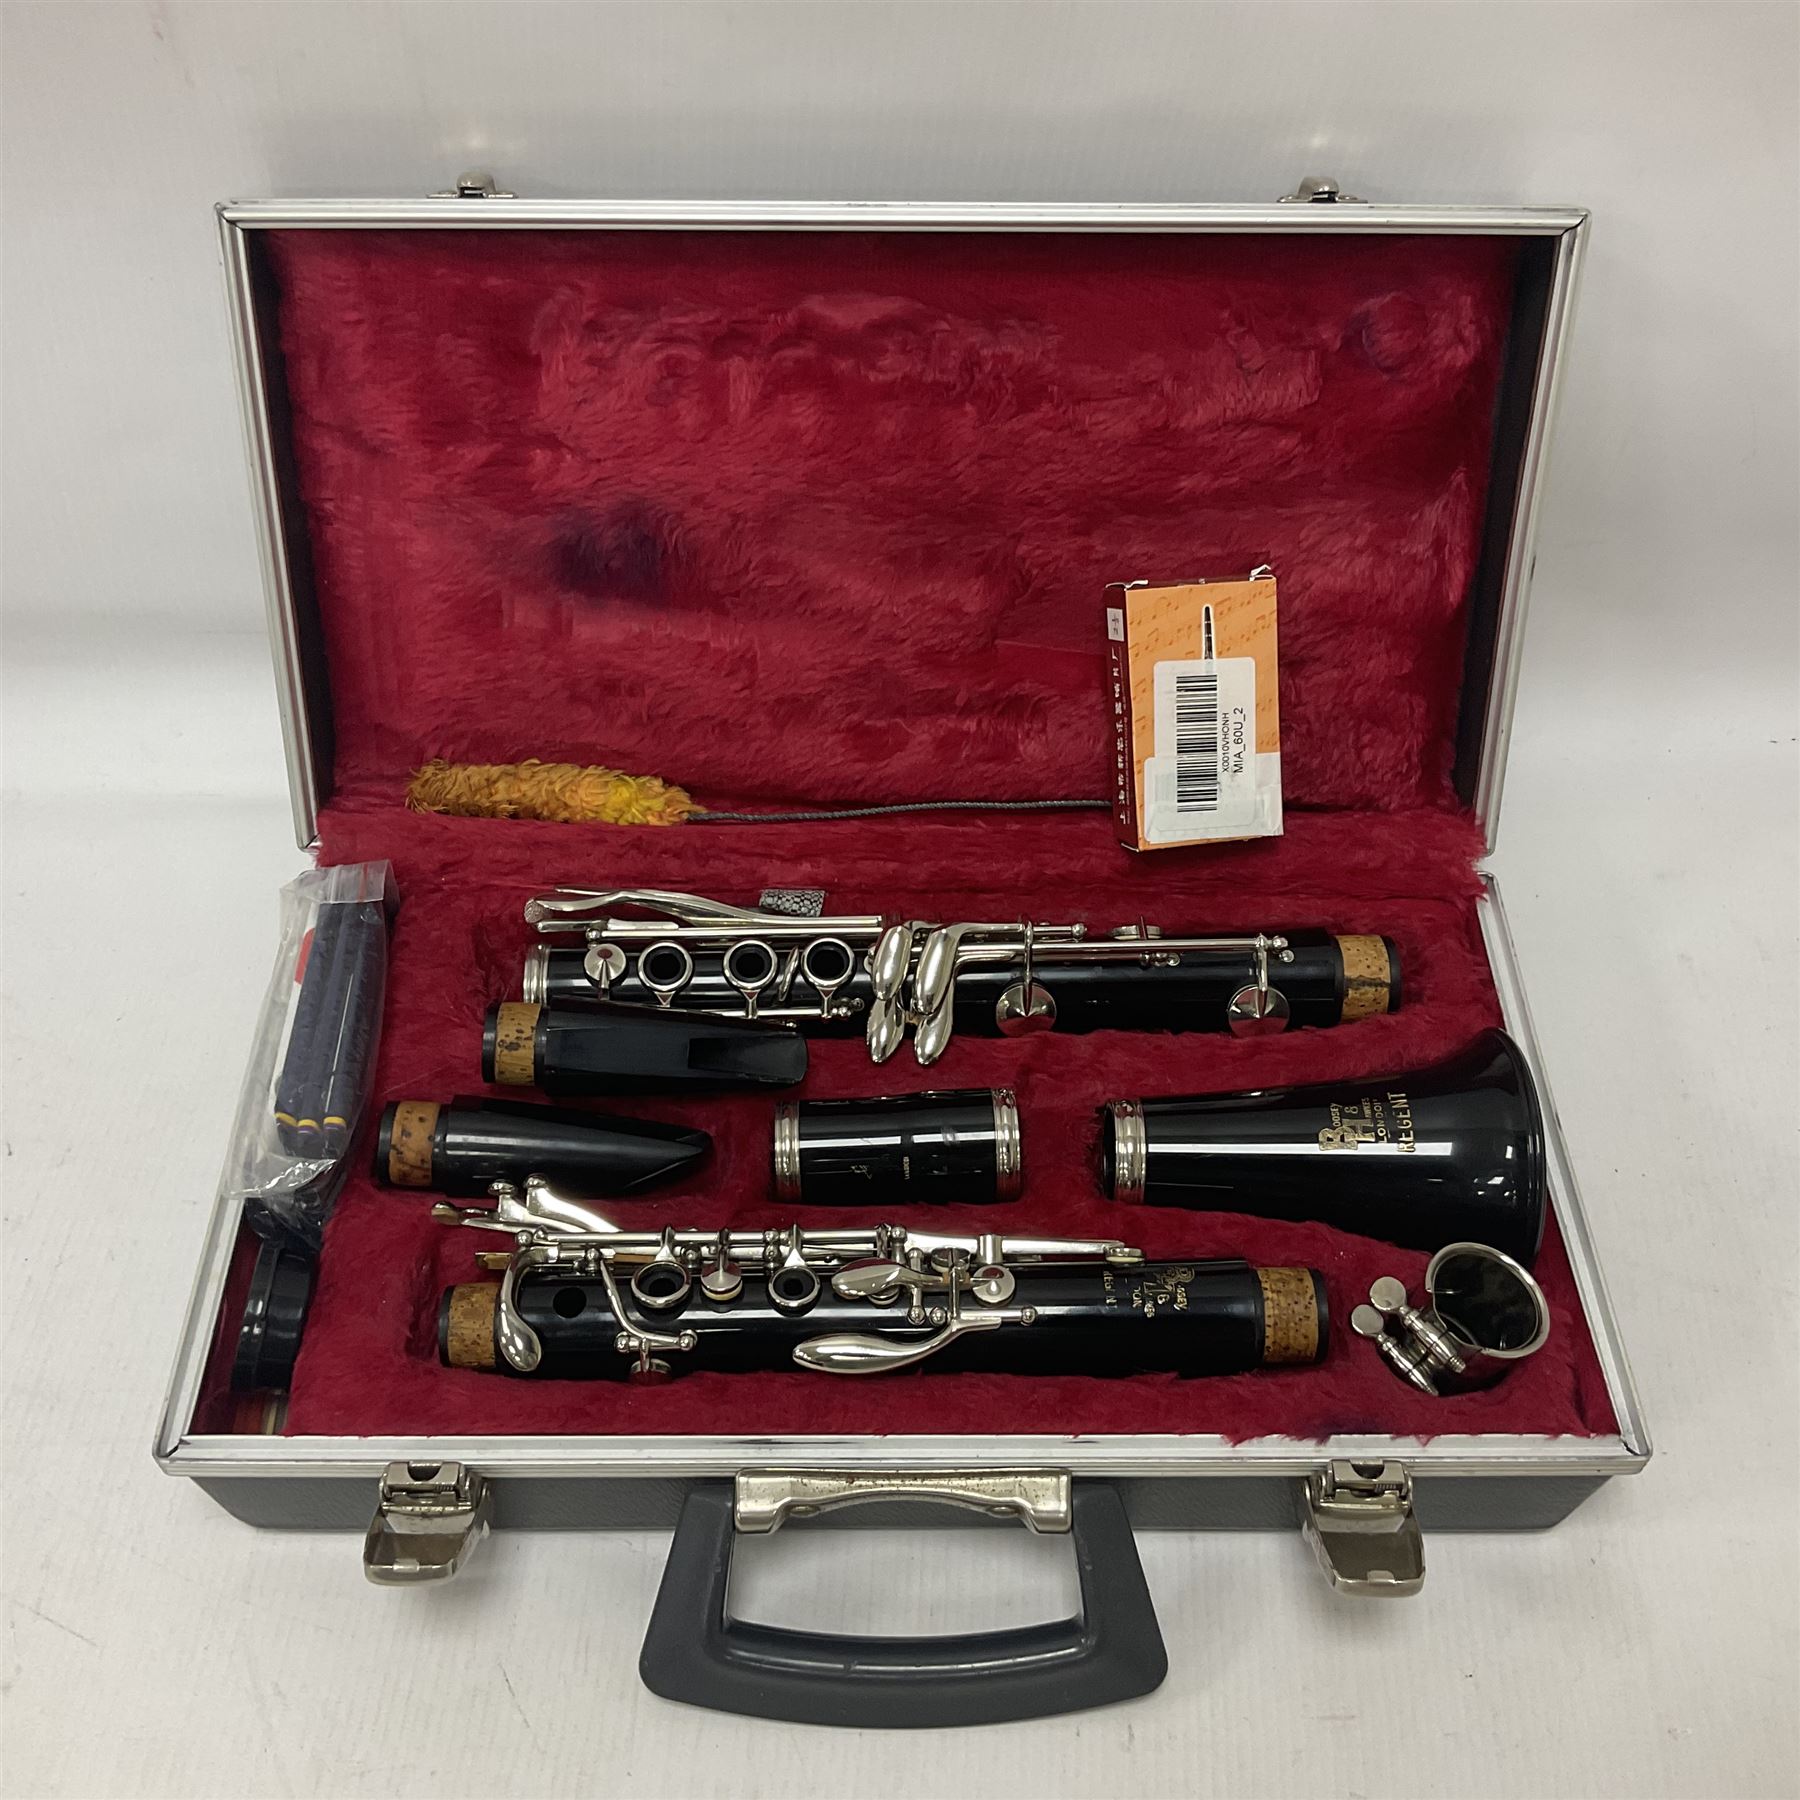 Boosey & Hawkes Regent B flat clarinet and accessories in a velvet lined fitted case - Image 2 of 19